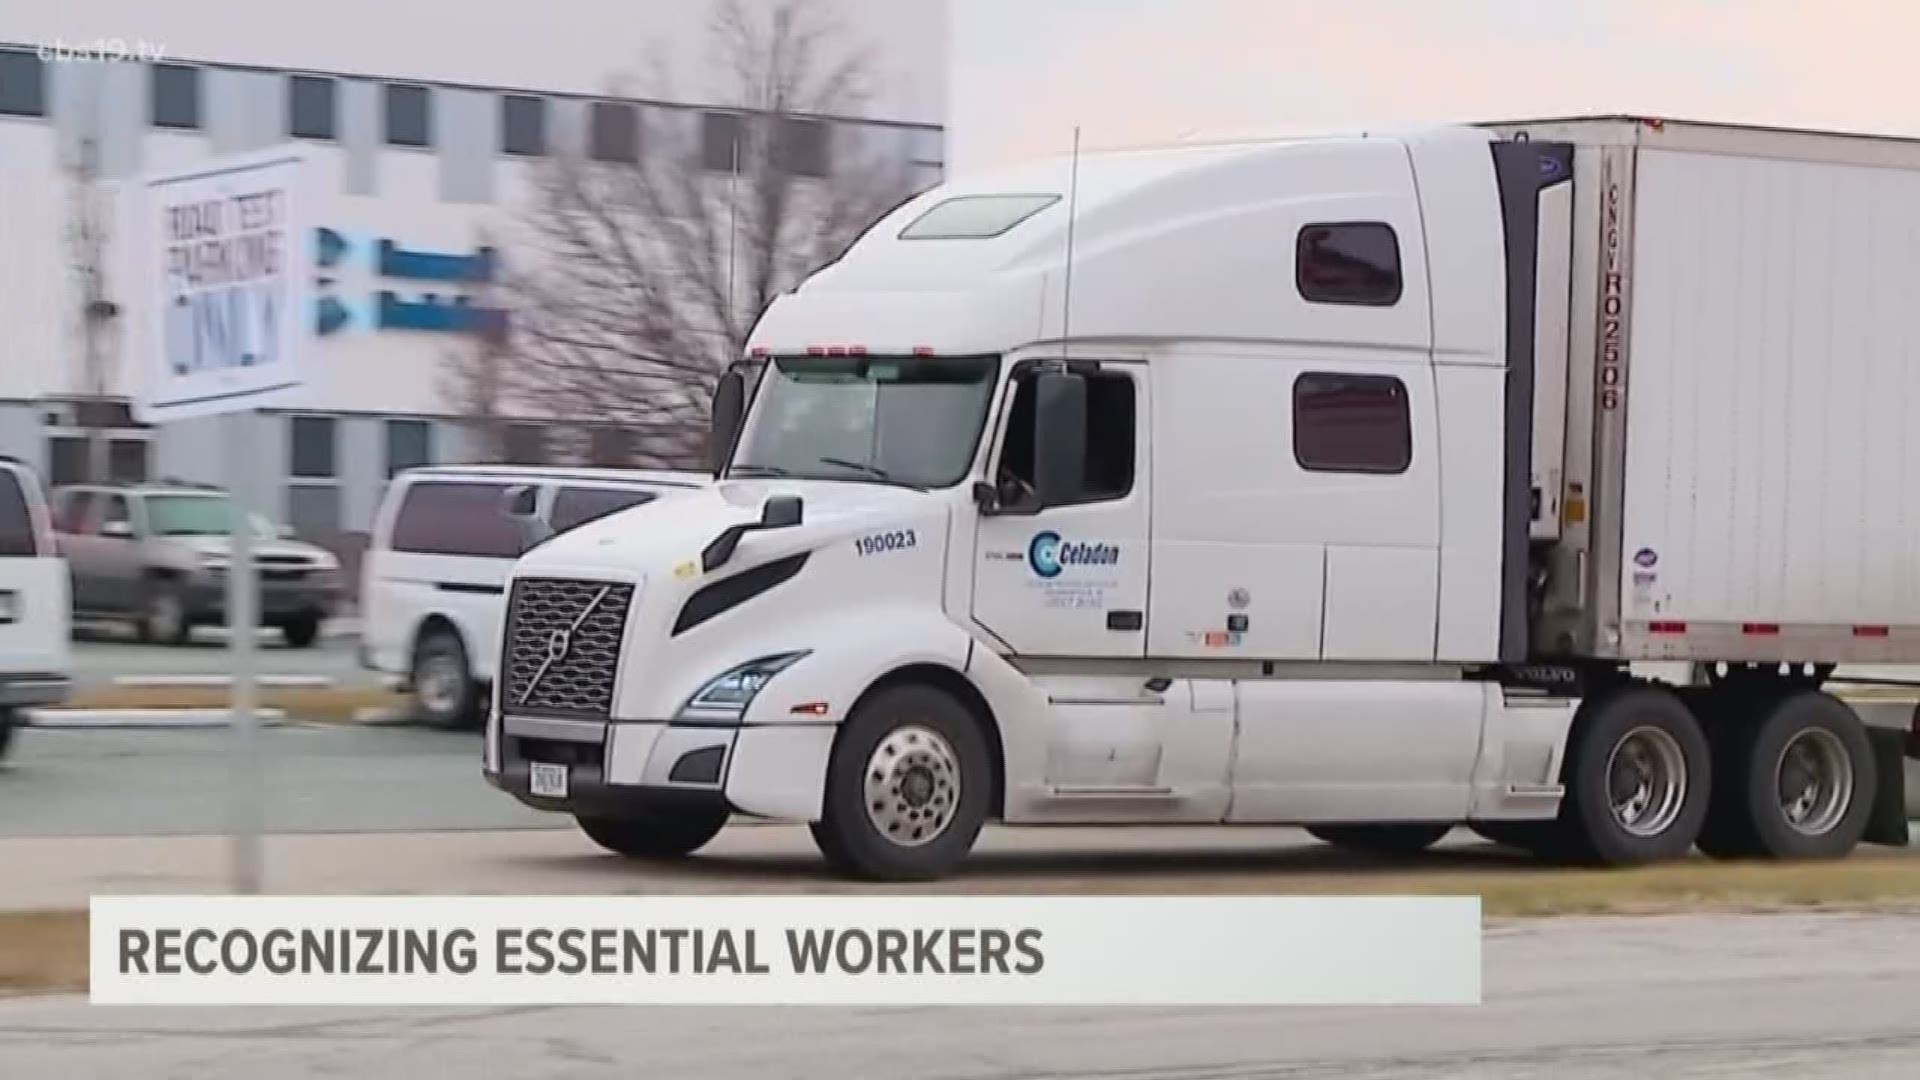 There are more than 3 million truckers on the road, and companies are trying to provide them what they need to them safe.